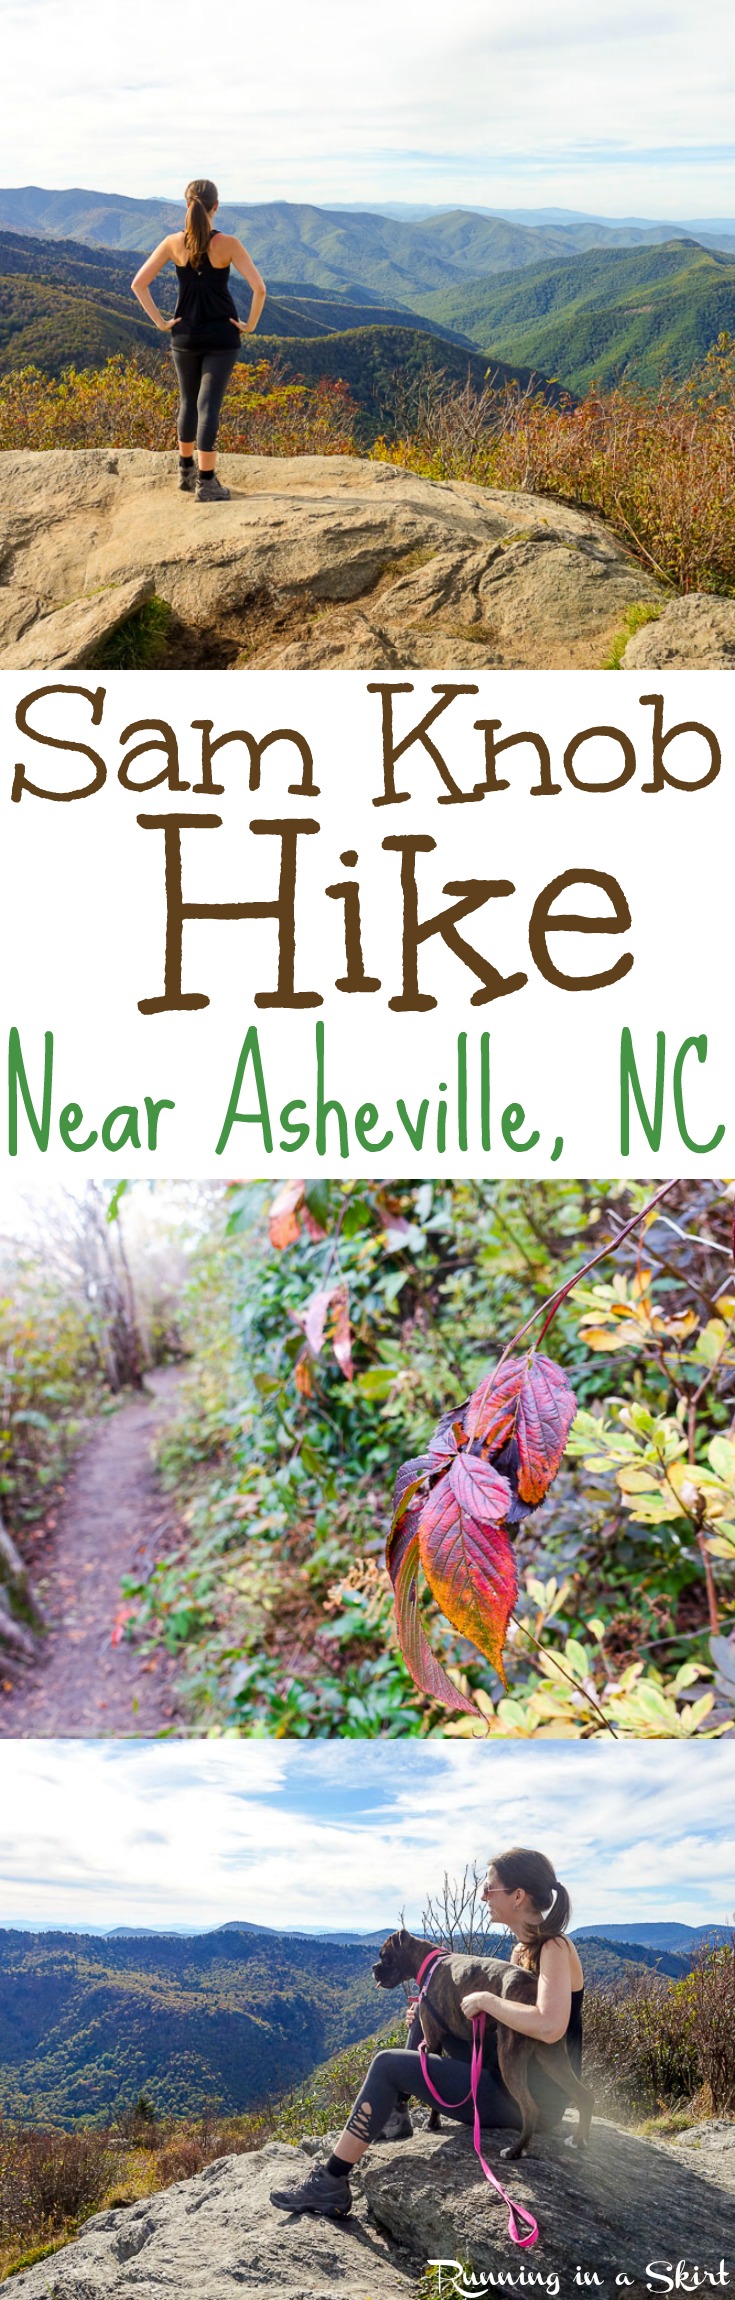 Sam Knob Hike - Details about this gorgeous 2 1/12 mile summit view day hike along the Blue Ridge Parkway near Asheville, North Carolina. Beautiful NC Mountains fall views and one of my favorite Asheville hikes. / Running in a Skirt via @juliewunder